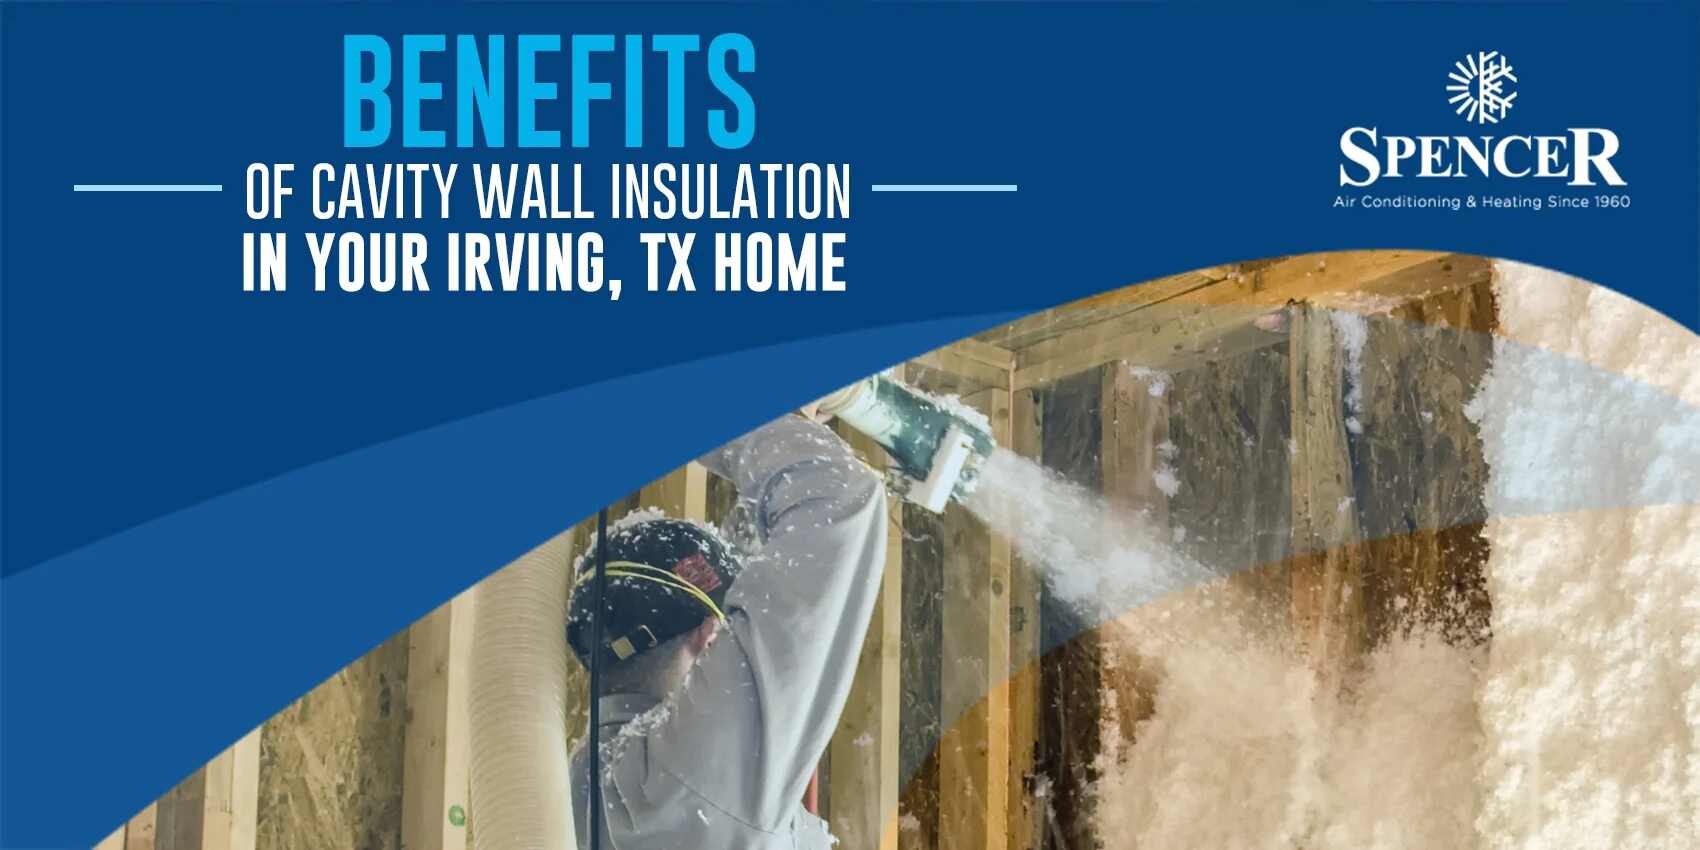 Benefits of Cavity Wall Insulation in Your Irving, TX Home